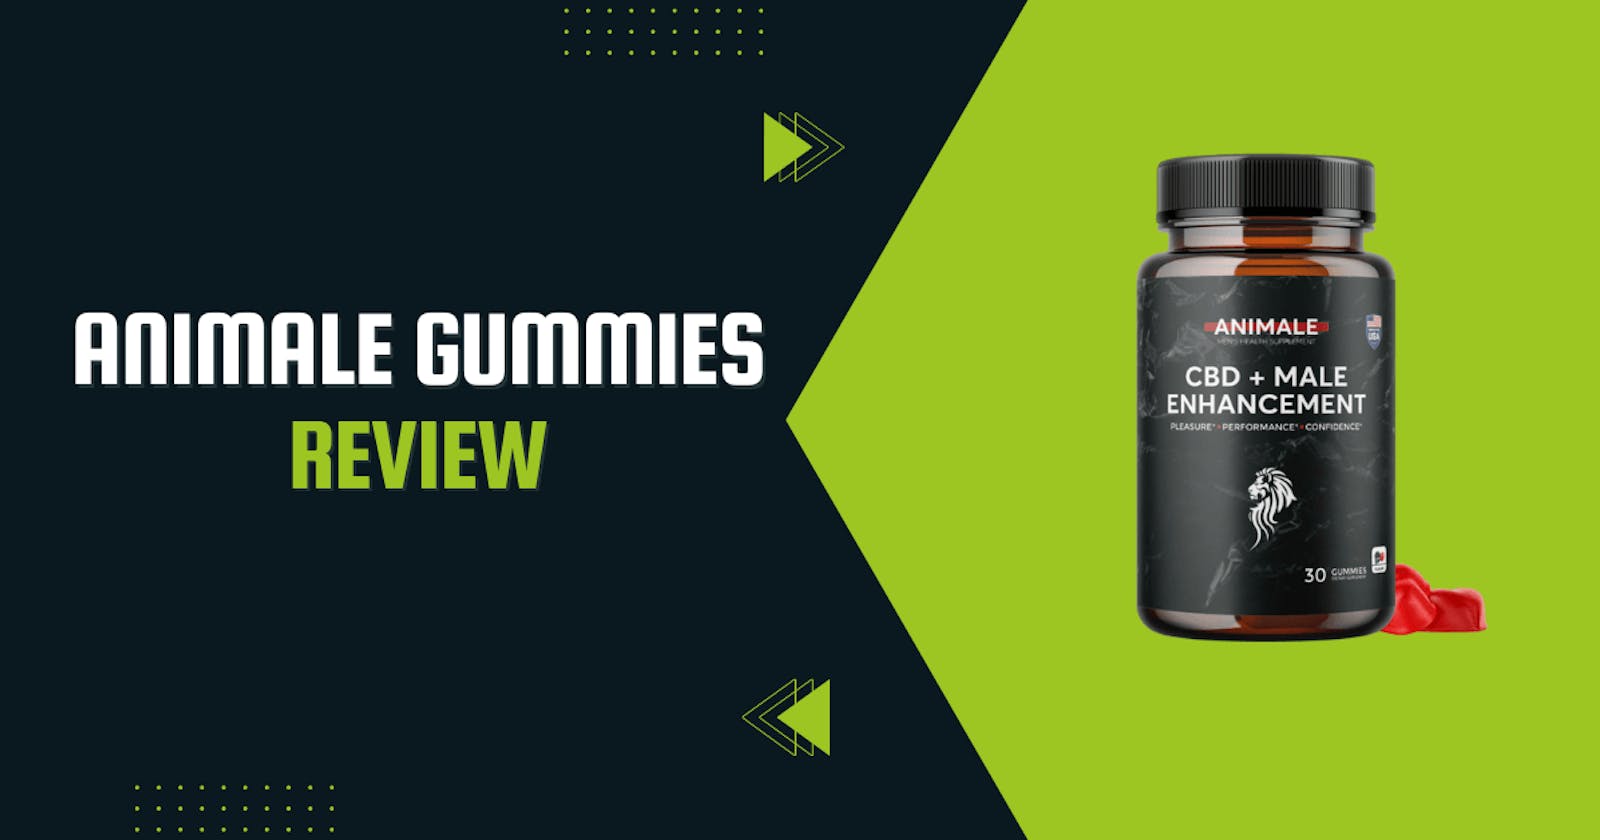 Animale CBD Gummies Reviews For Better Health Enhancement: Shocking Price & Benefits On Male & Female !